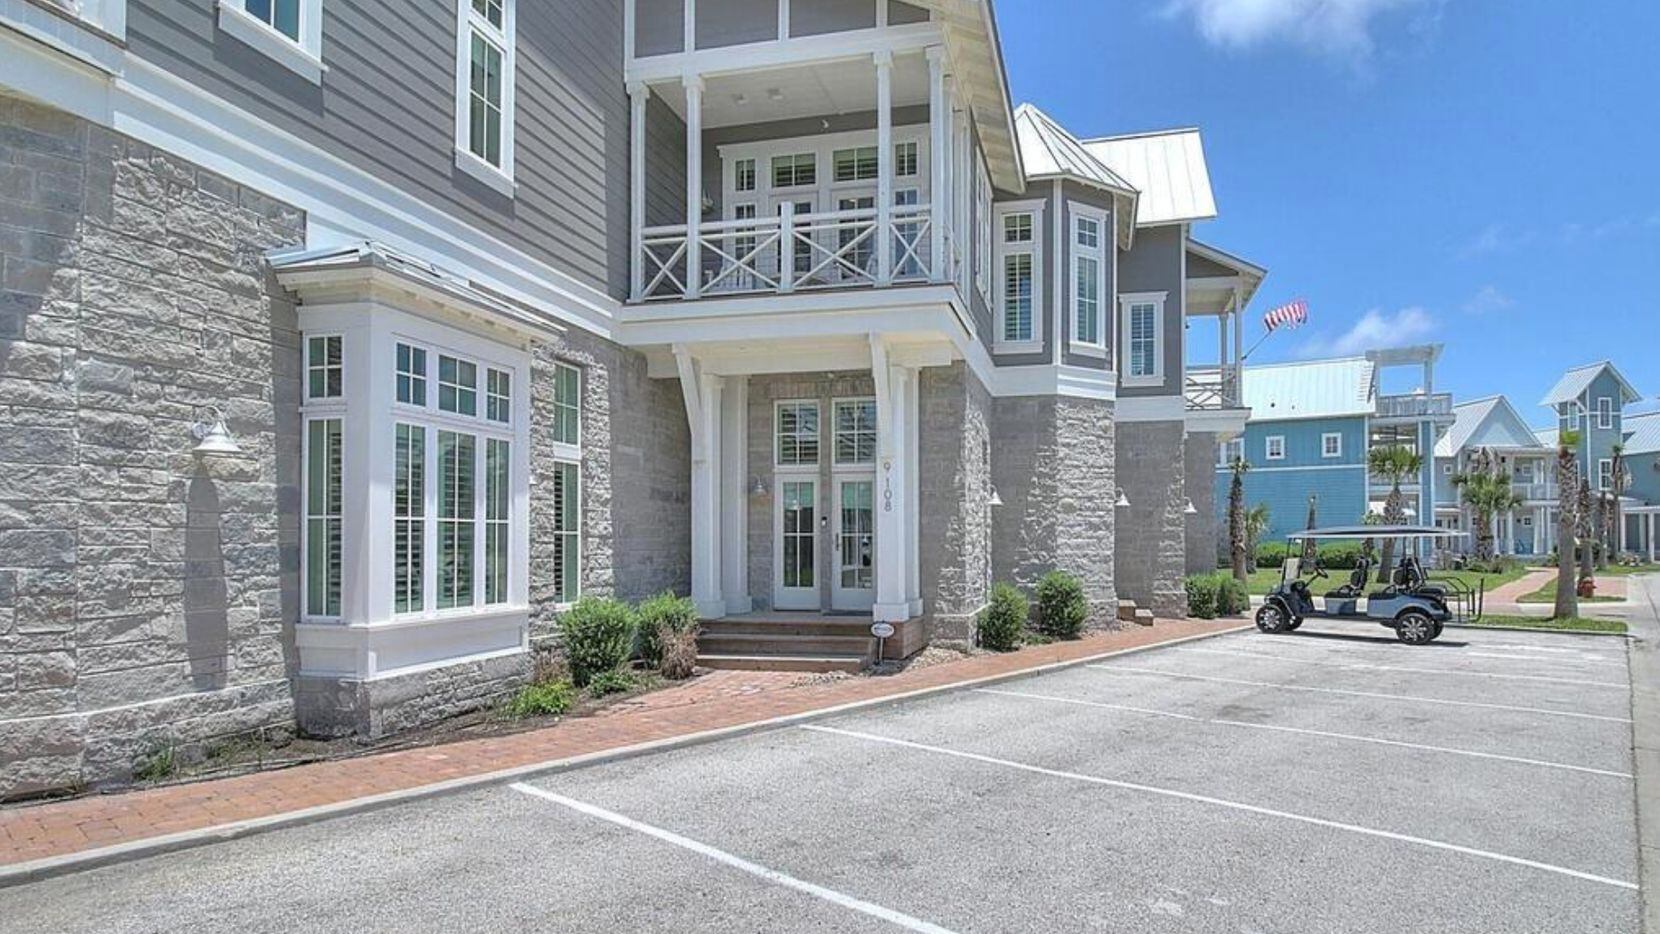 This three-bedroom townhouse in Port Aransas will set you back $929,000.